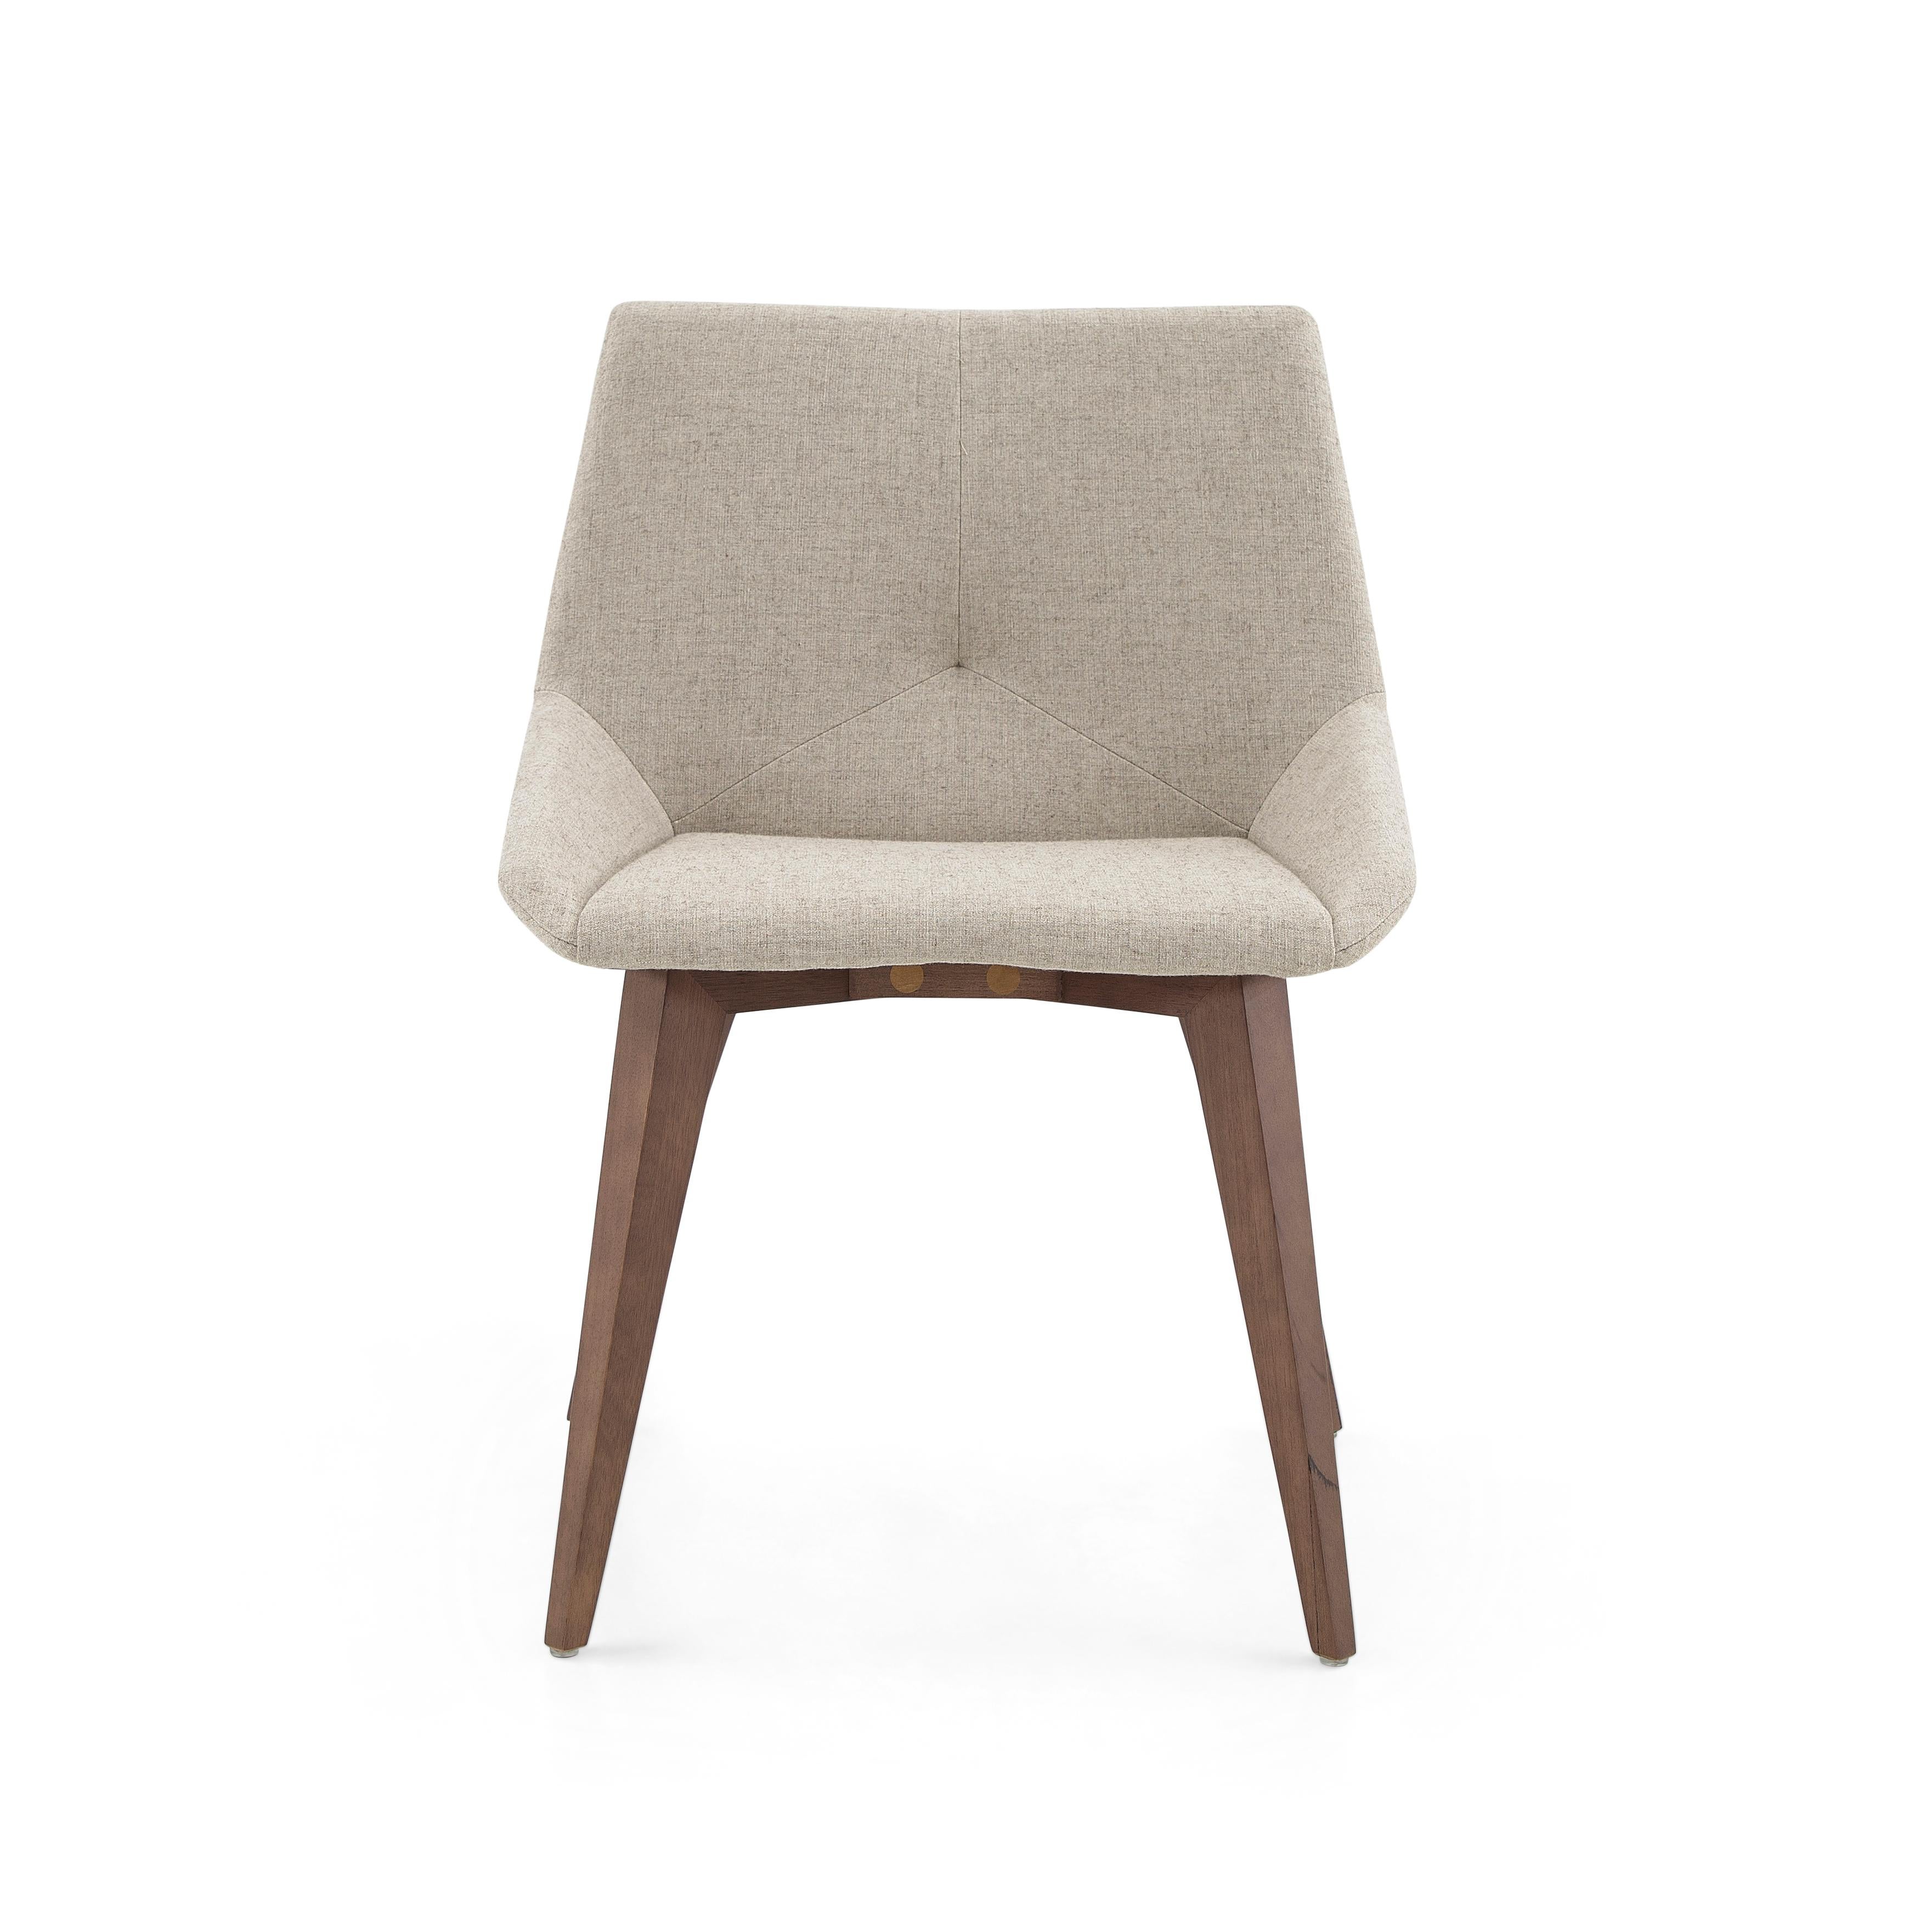 Geometric Cubi Dining Chair with Walnut Wood Finish Base and Ivory Fabric In New Condition For Sale In Miami, FL